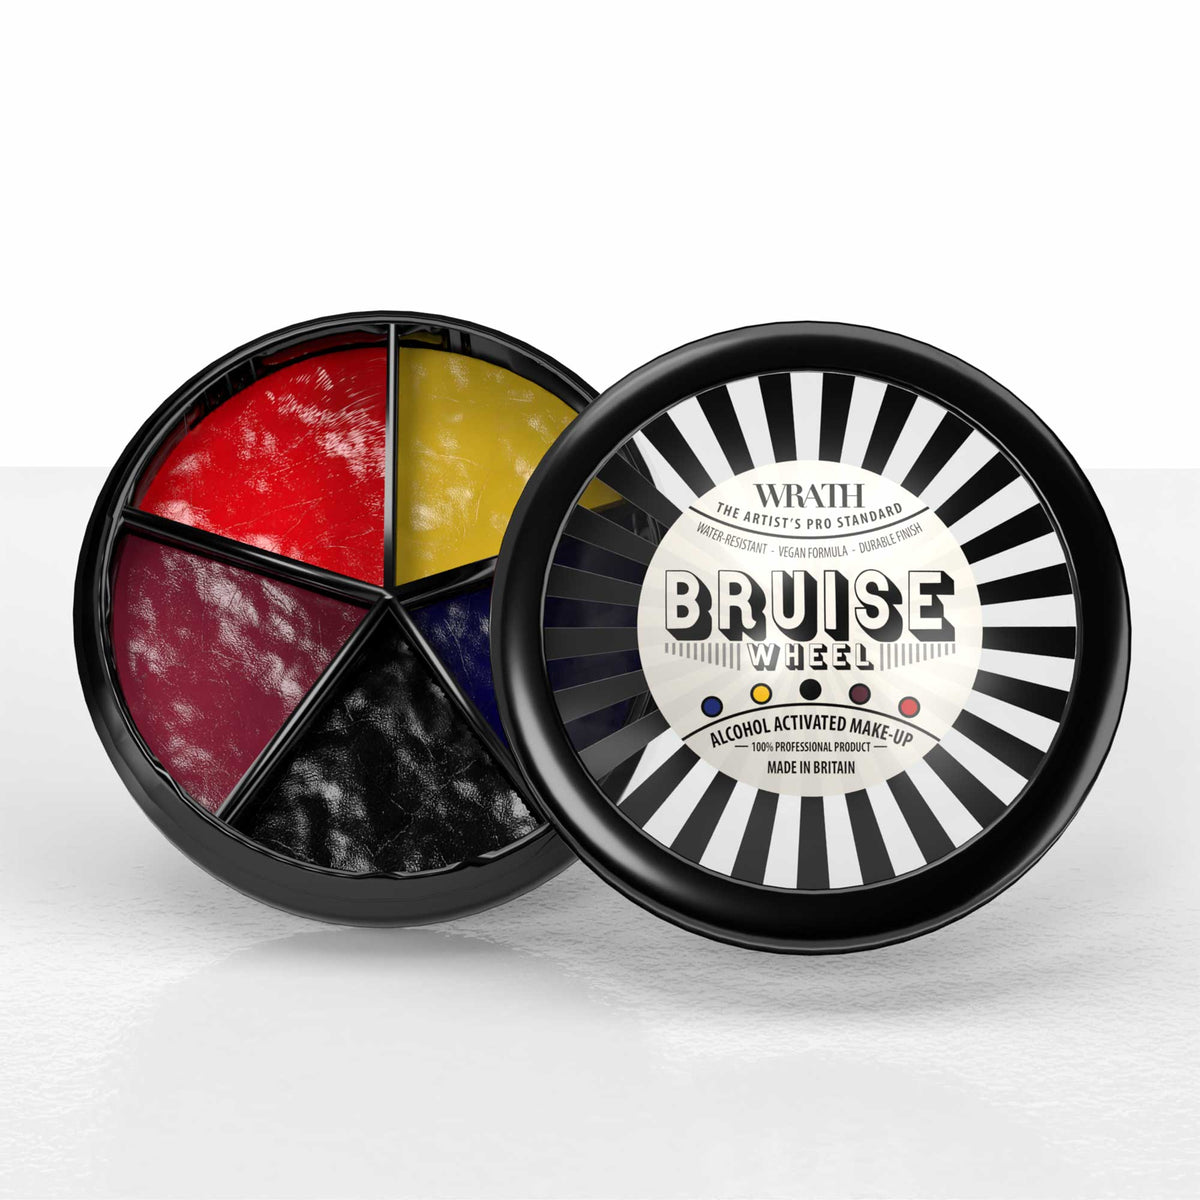 WRATH Alcohol Activated Make-up - Bruise Wheel